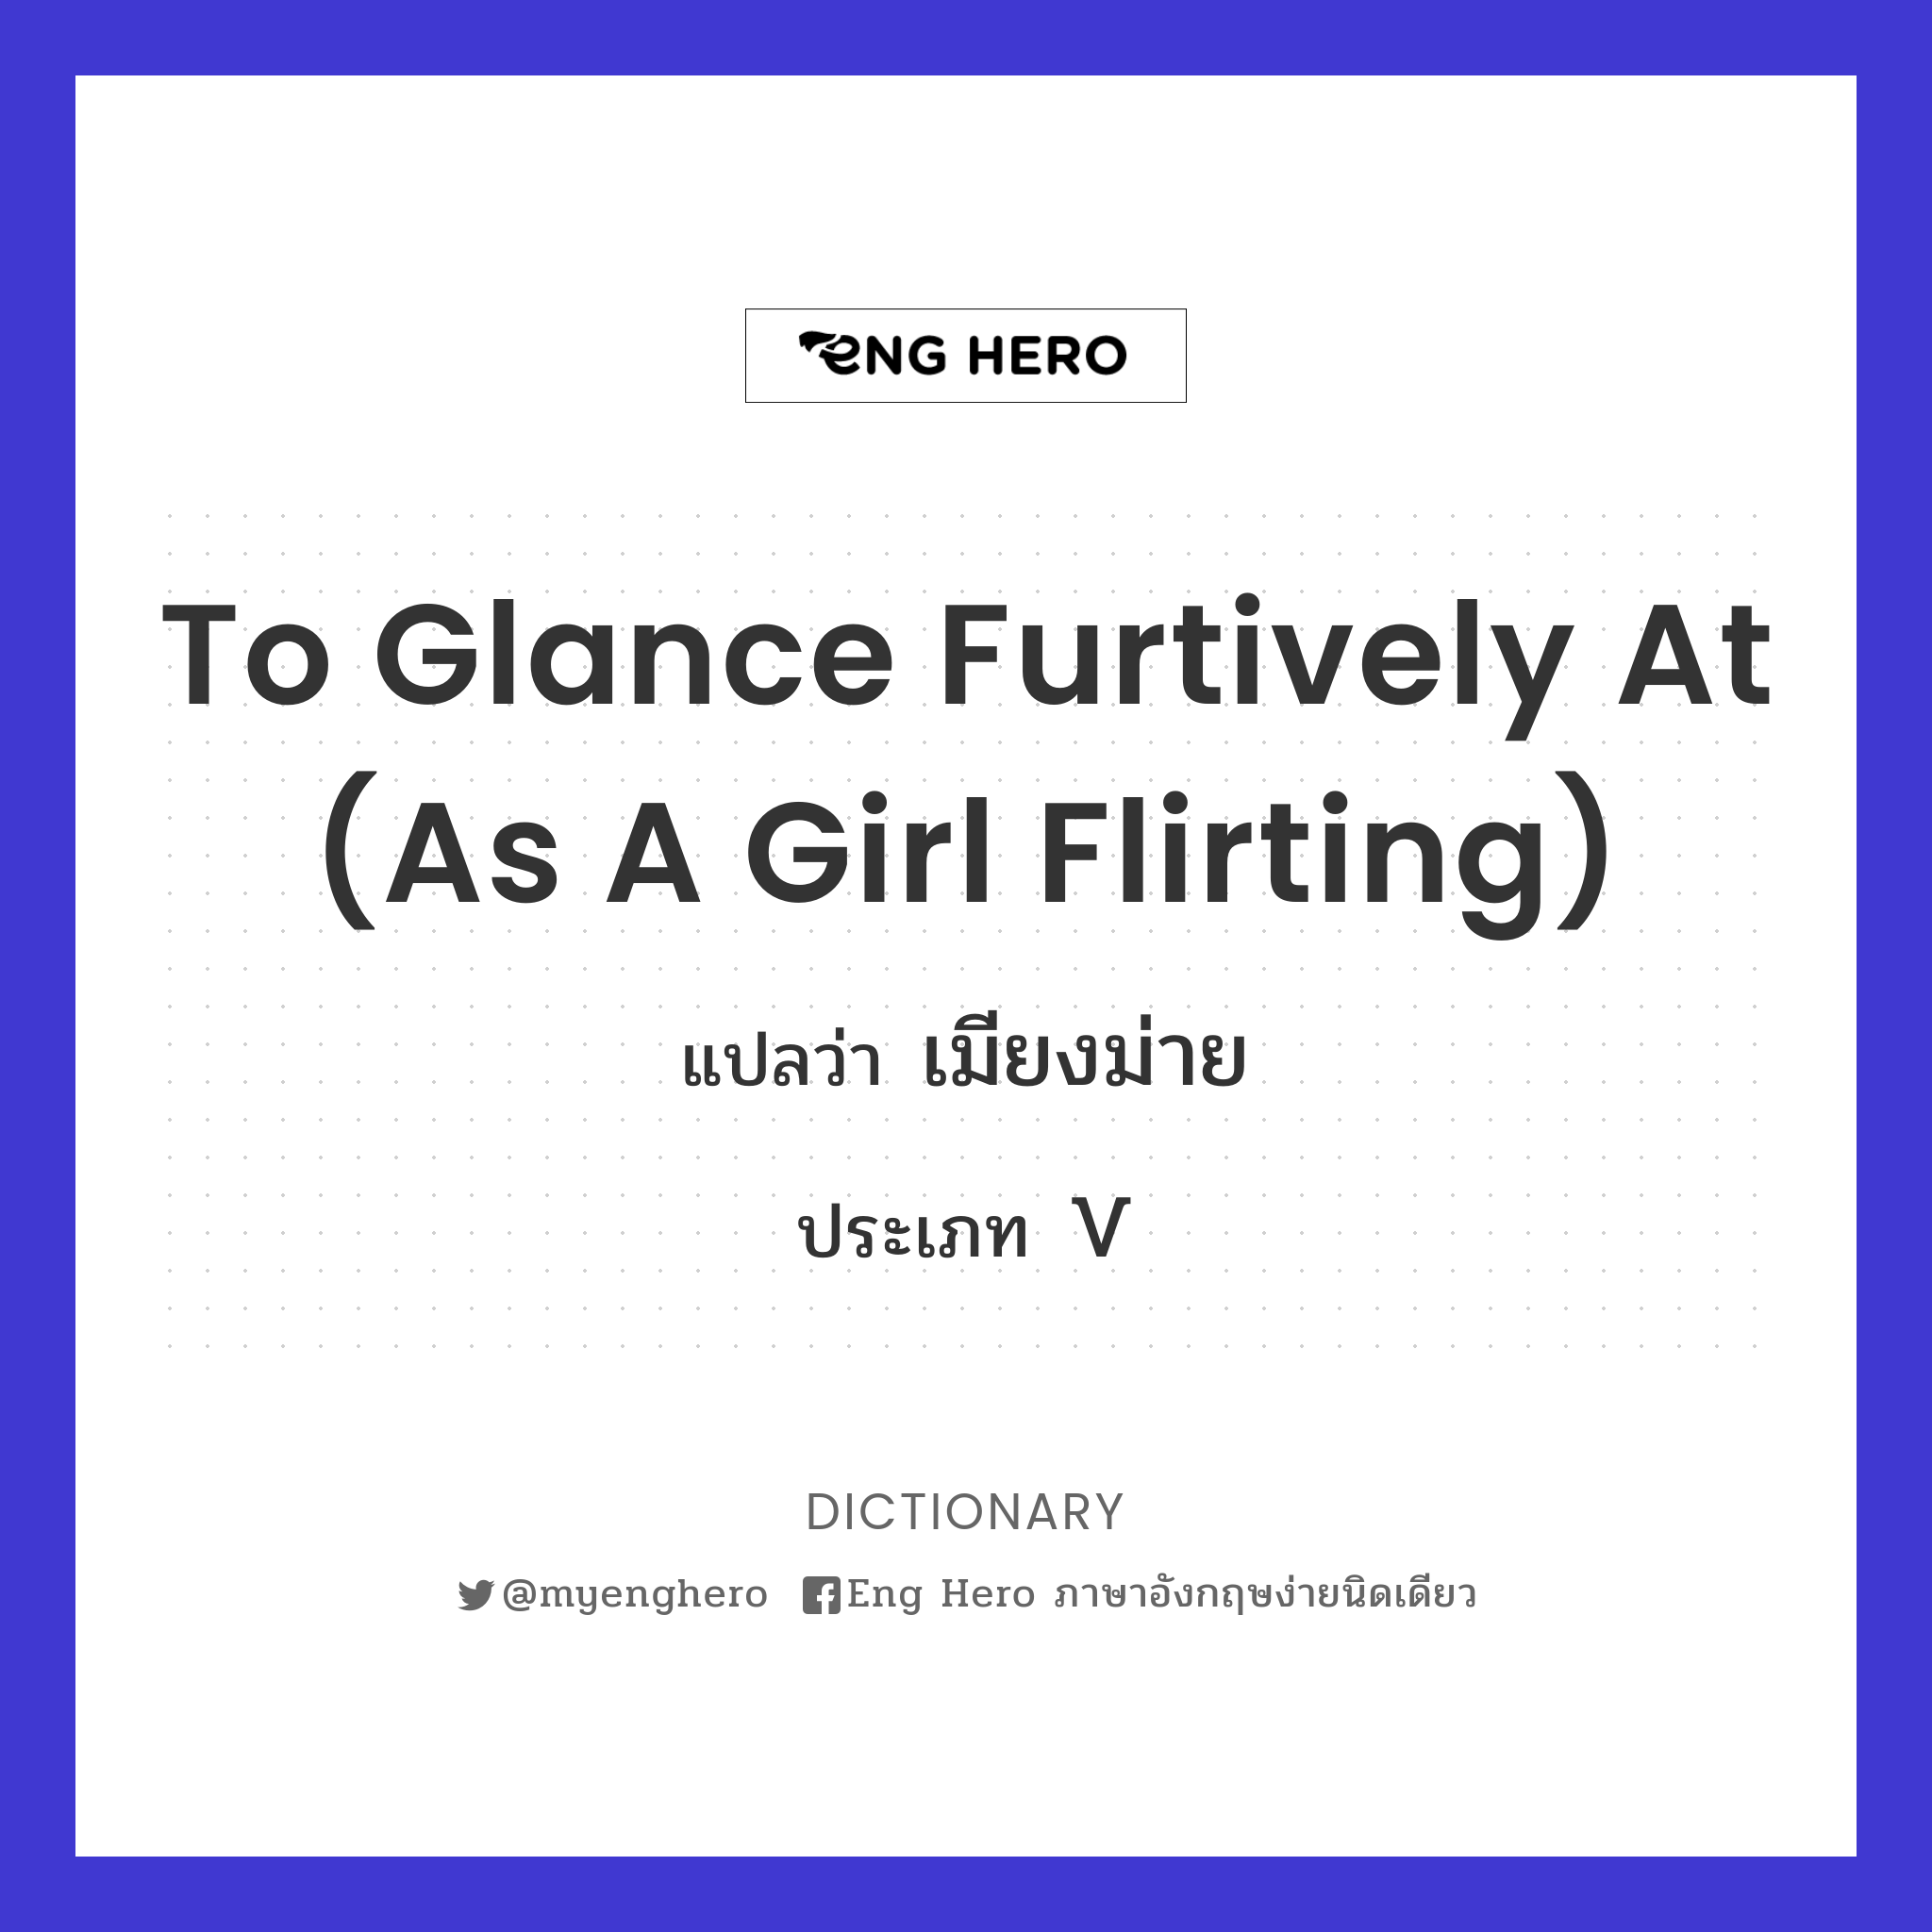 to glance furtively at (as a girl flirting)